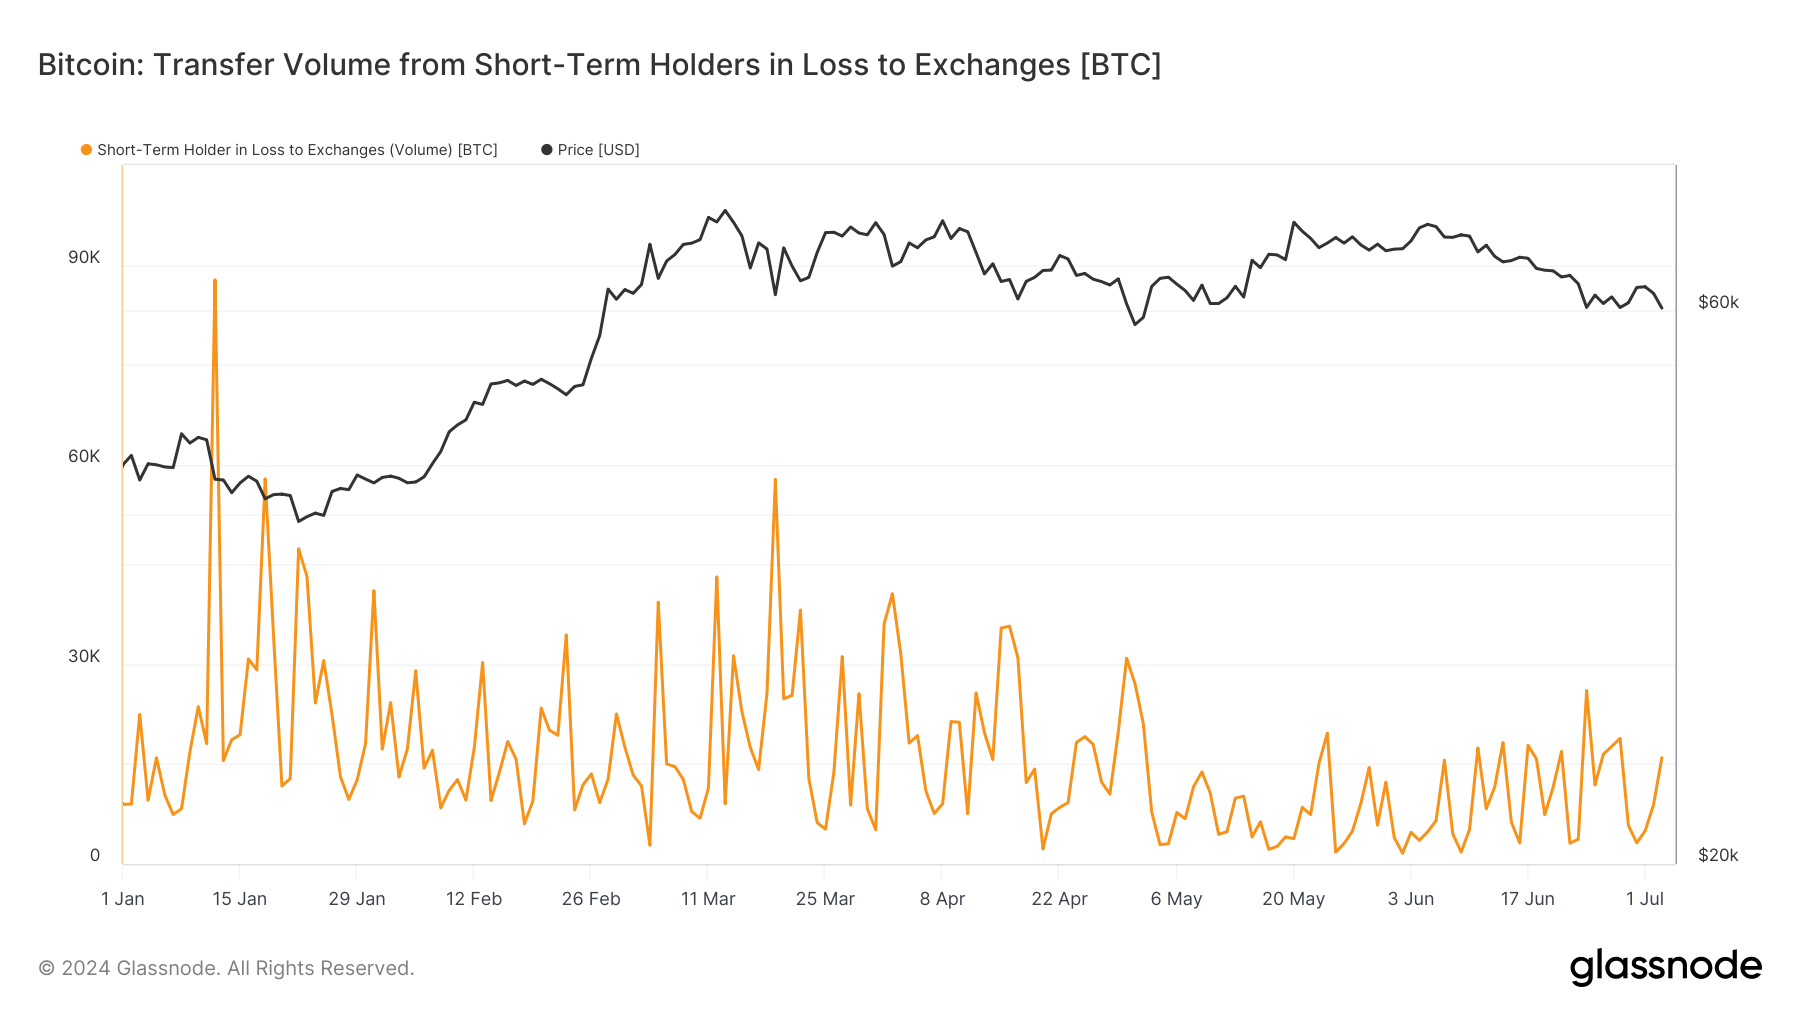 Transfer Volume from Short-Term Holders in Loss to Exchanges: (Source: Glassnode)